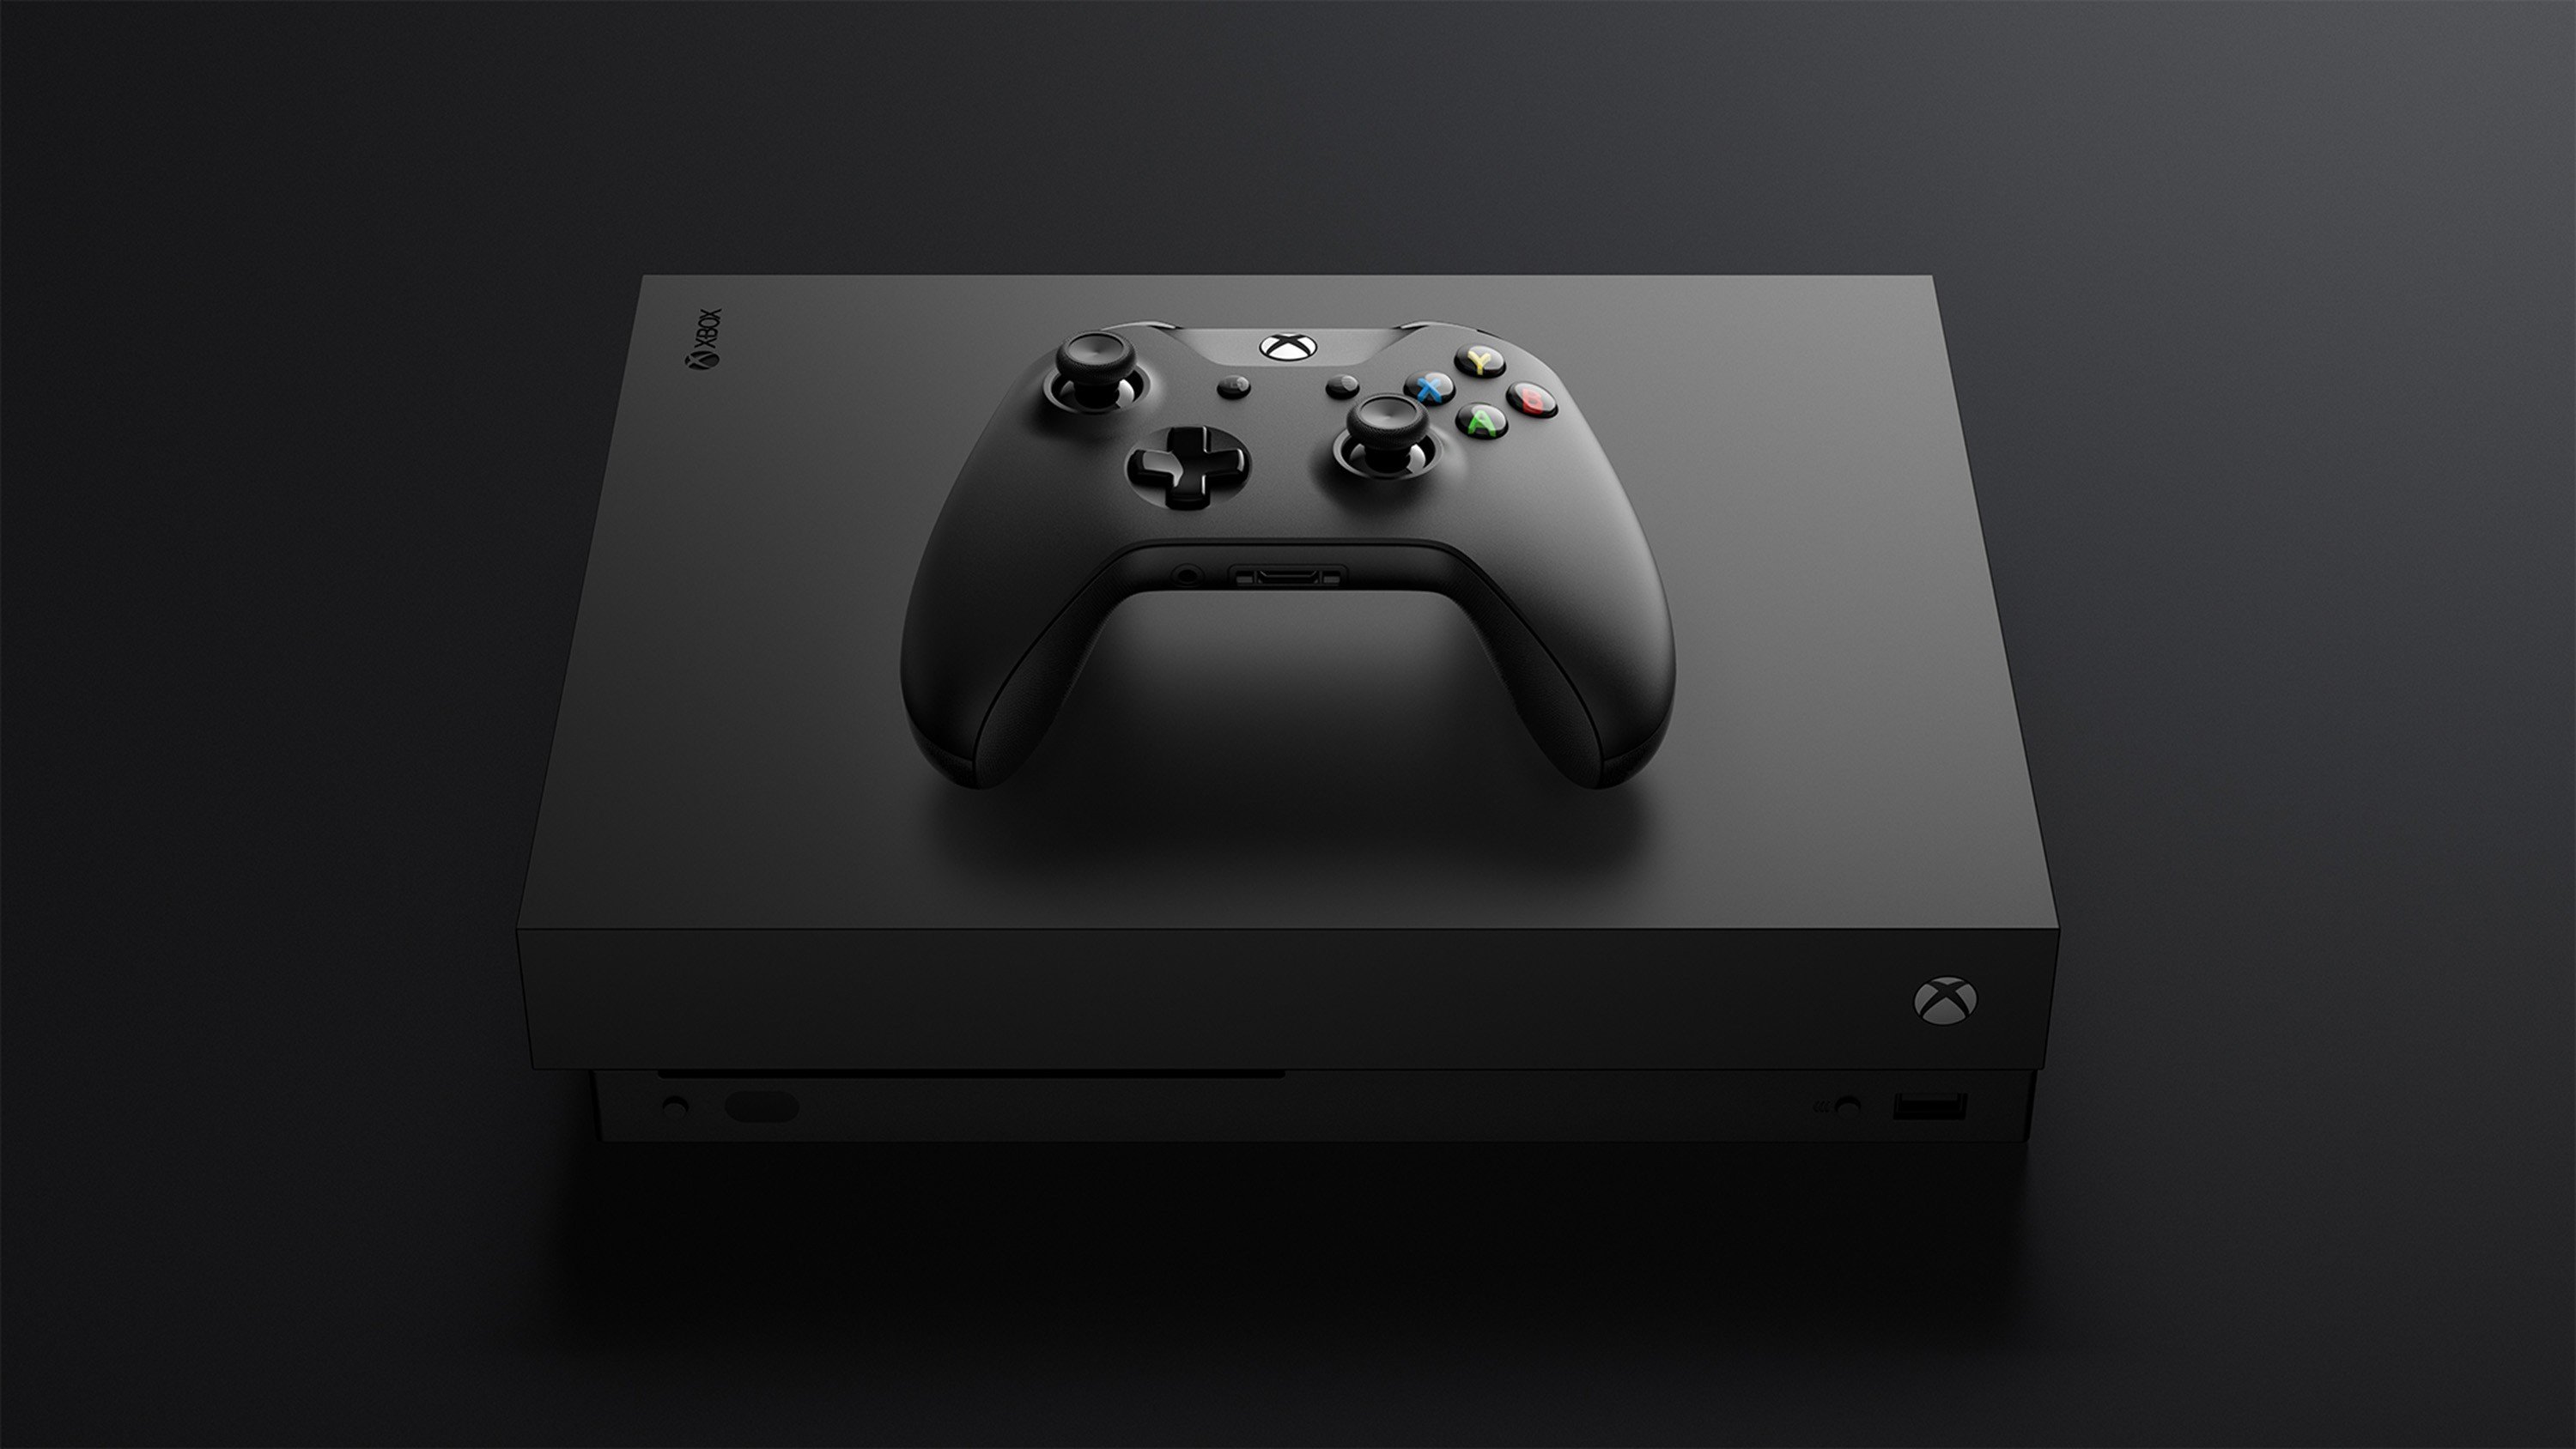 creatief Overeenkomstig met Allergie With Xbox One X, Microsoft hopes to ape Nintendo Switch's success and show  console gaming has a future | South China Morning Post